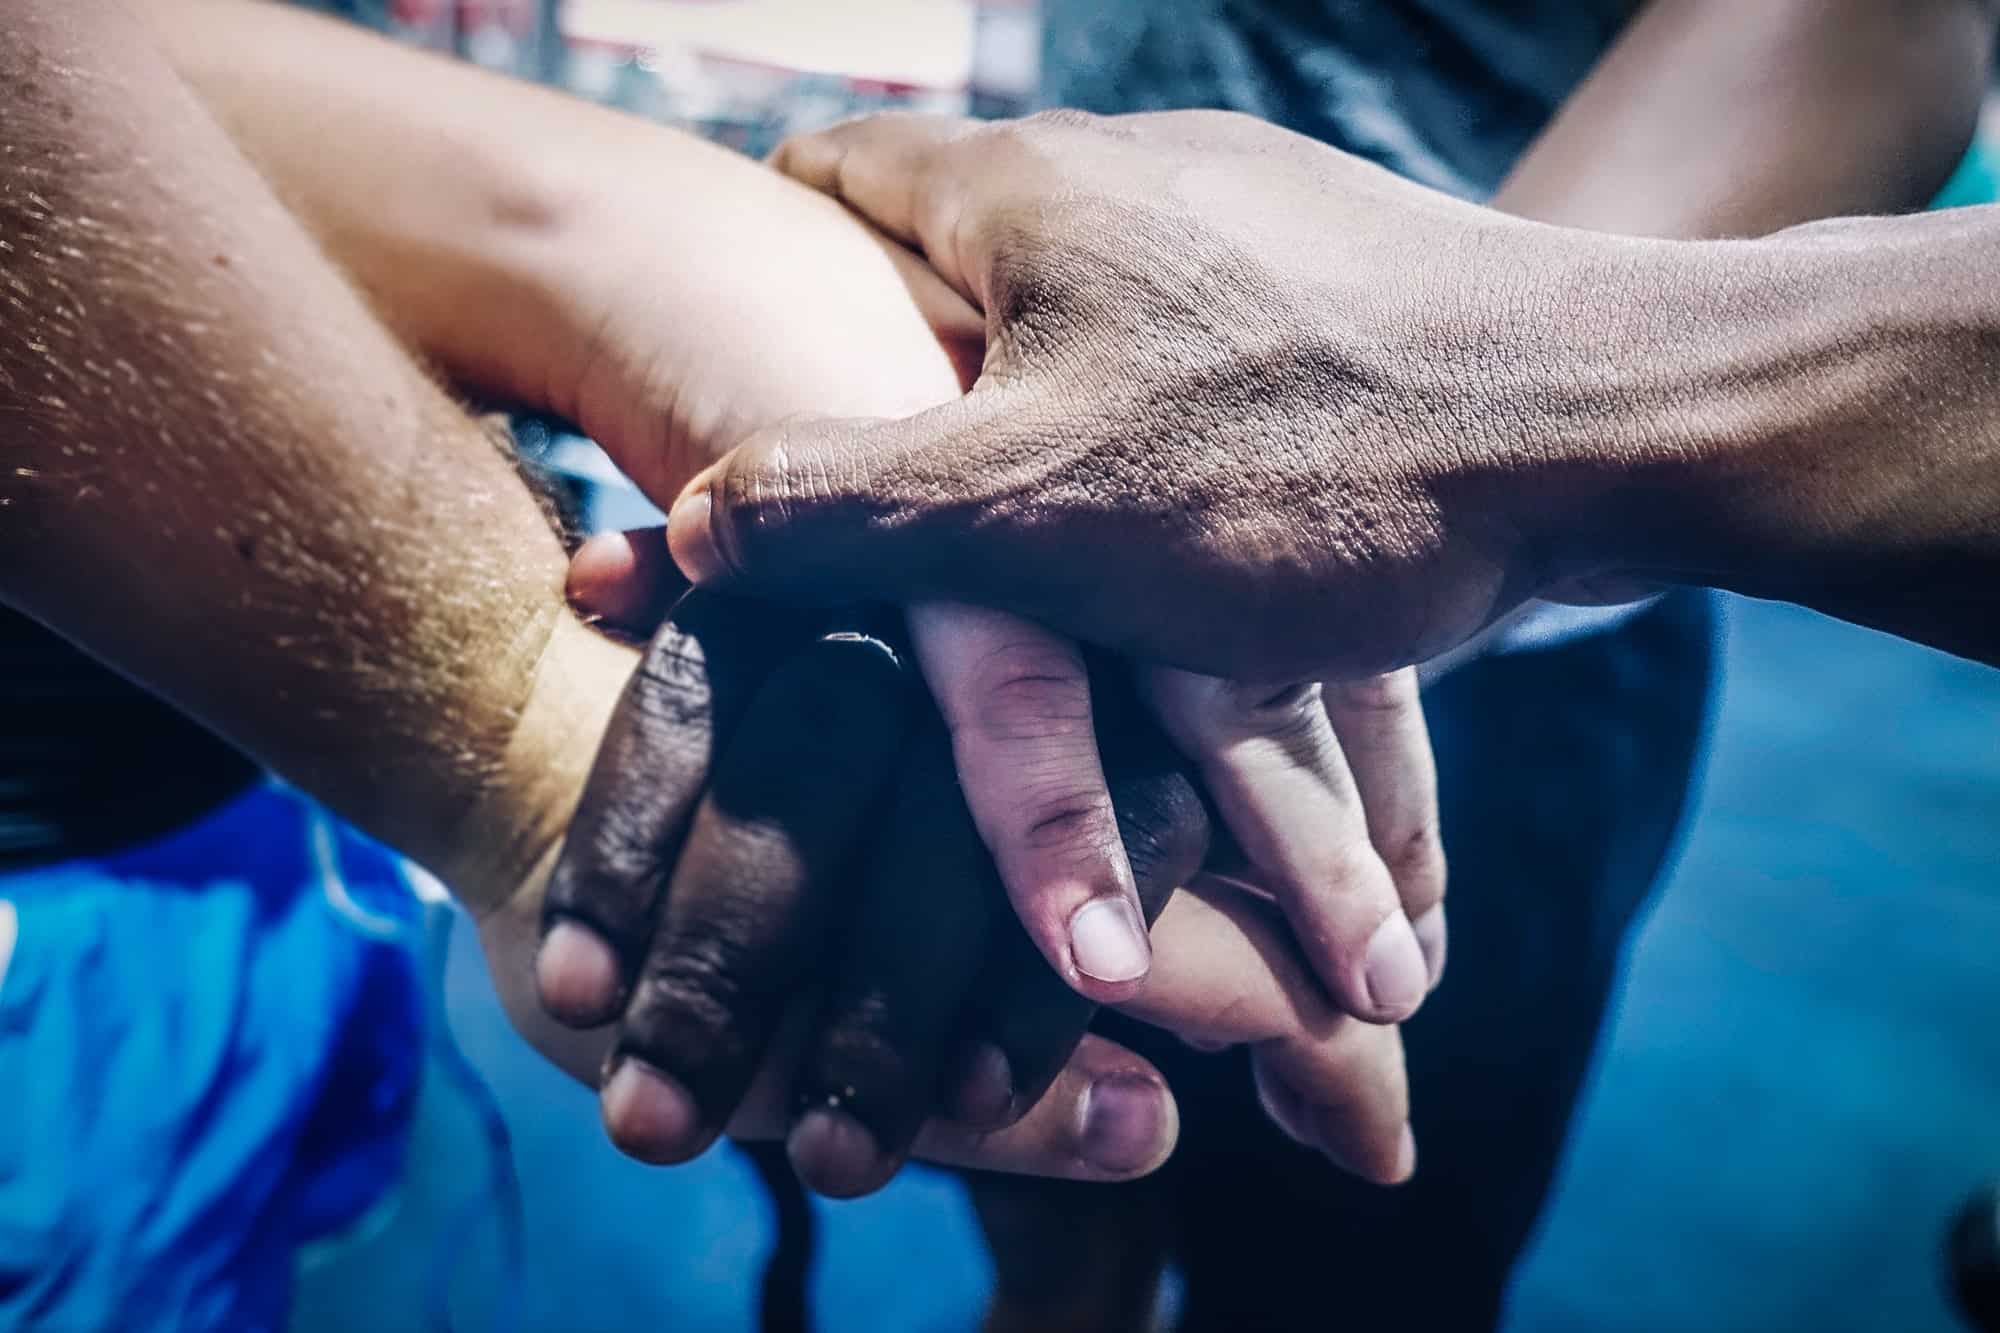 diverse group of people joining hands in unity support and team work gesture close up shot of hands